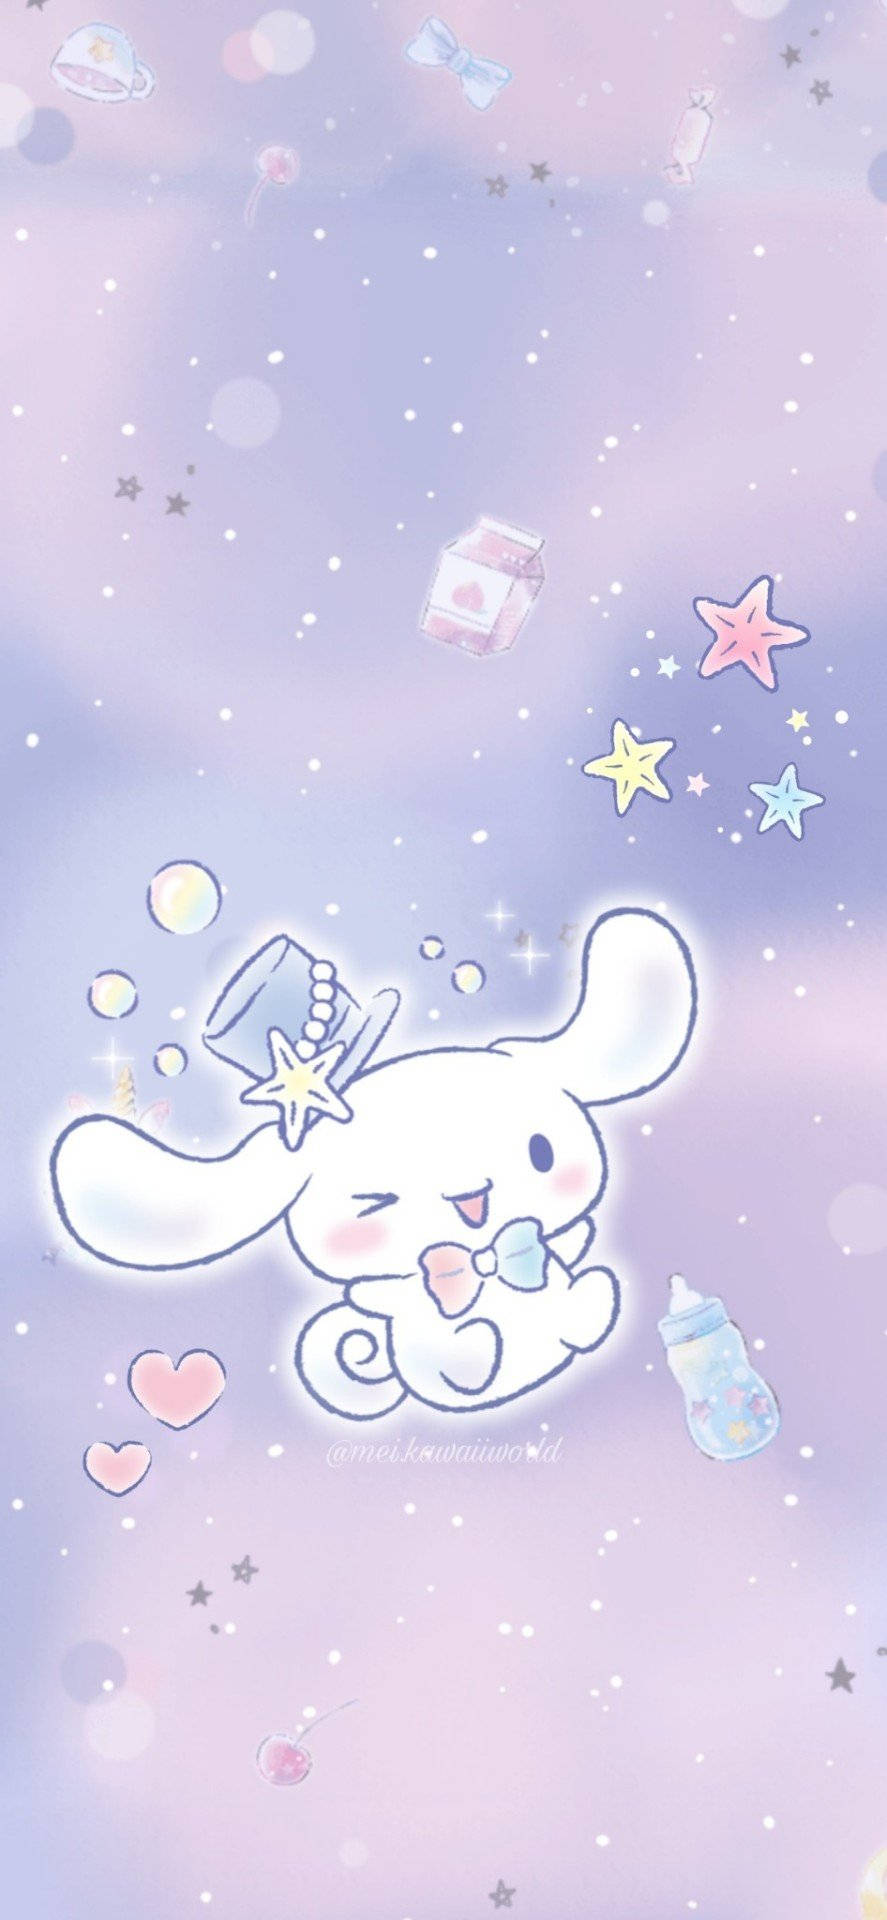 Download All The Best Moments With Cute Sanrio Wallpaper